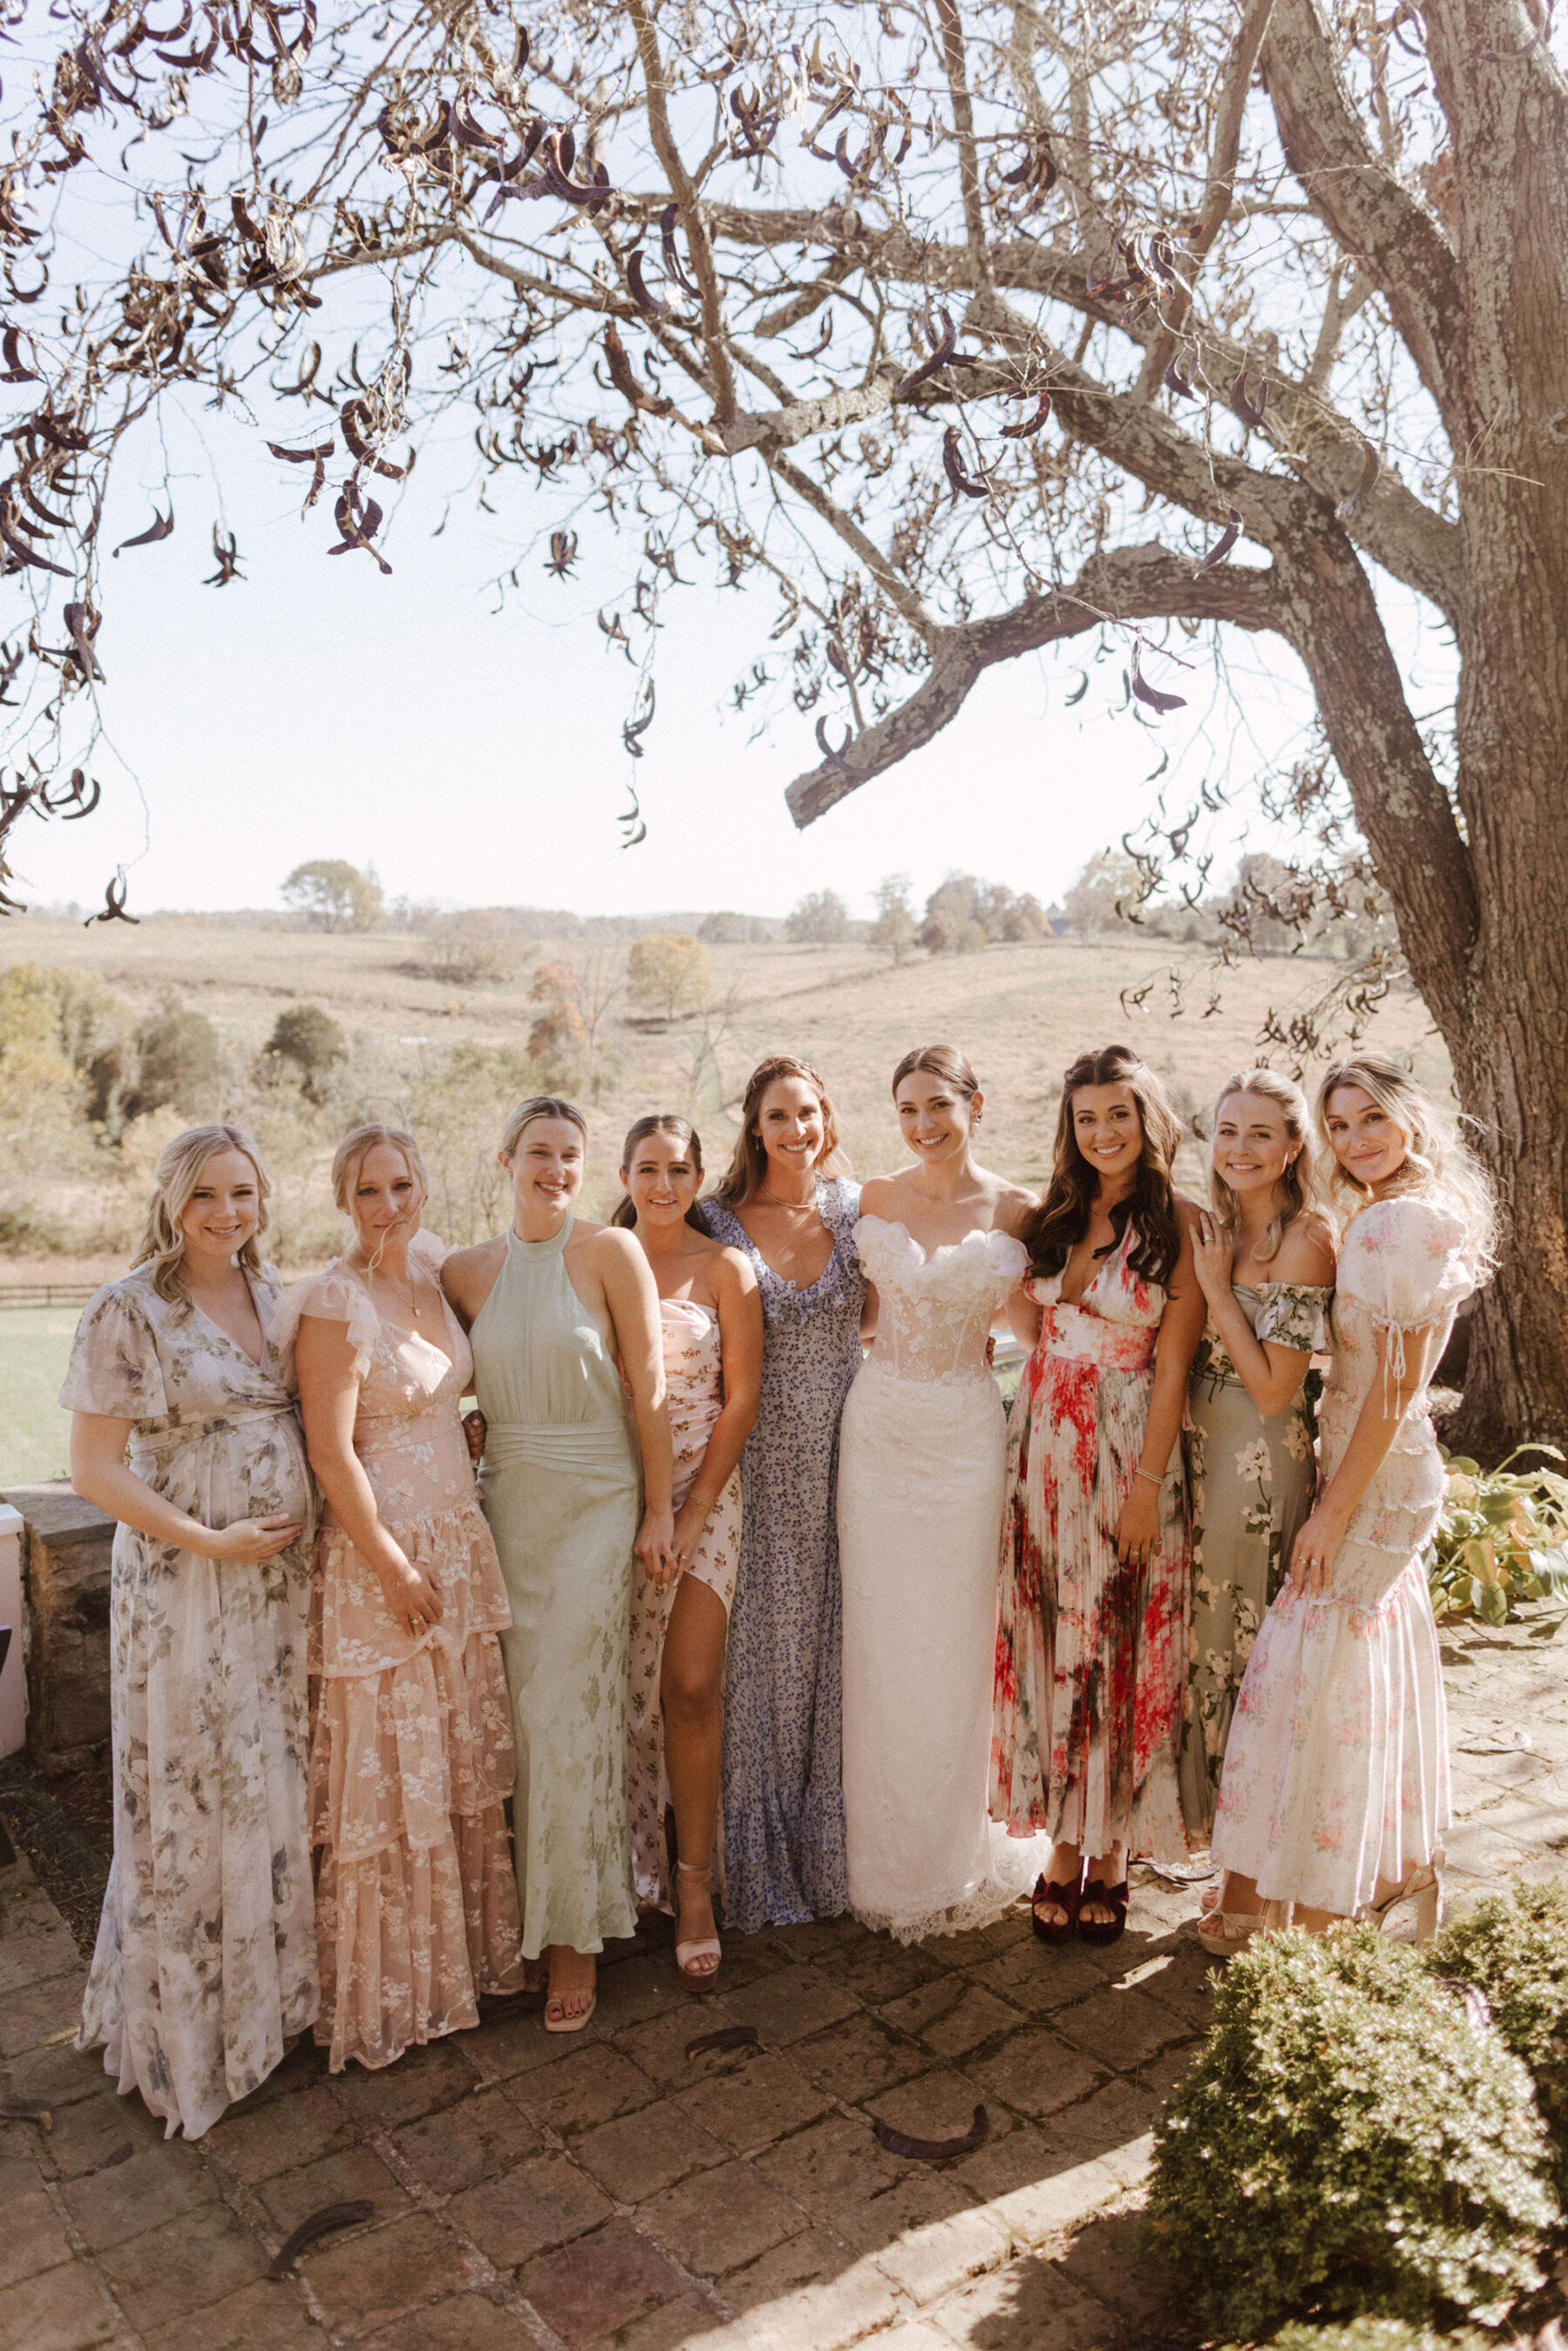 Bride wears Sally Bean Couture wedding dress standing with her besties in pretty mismatched bridesmaids dresses.